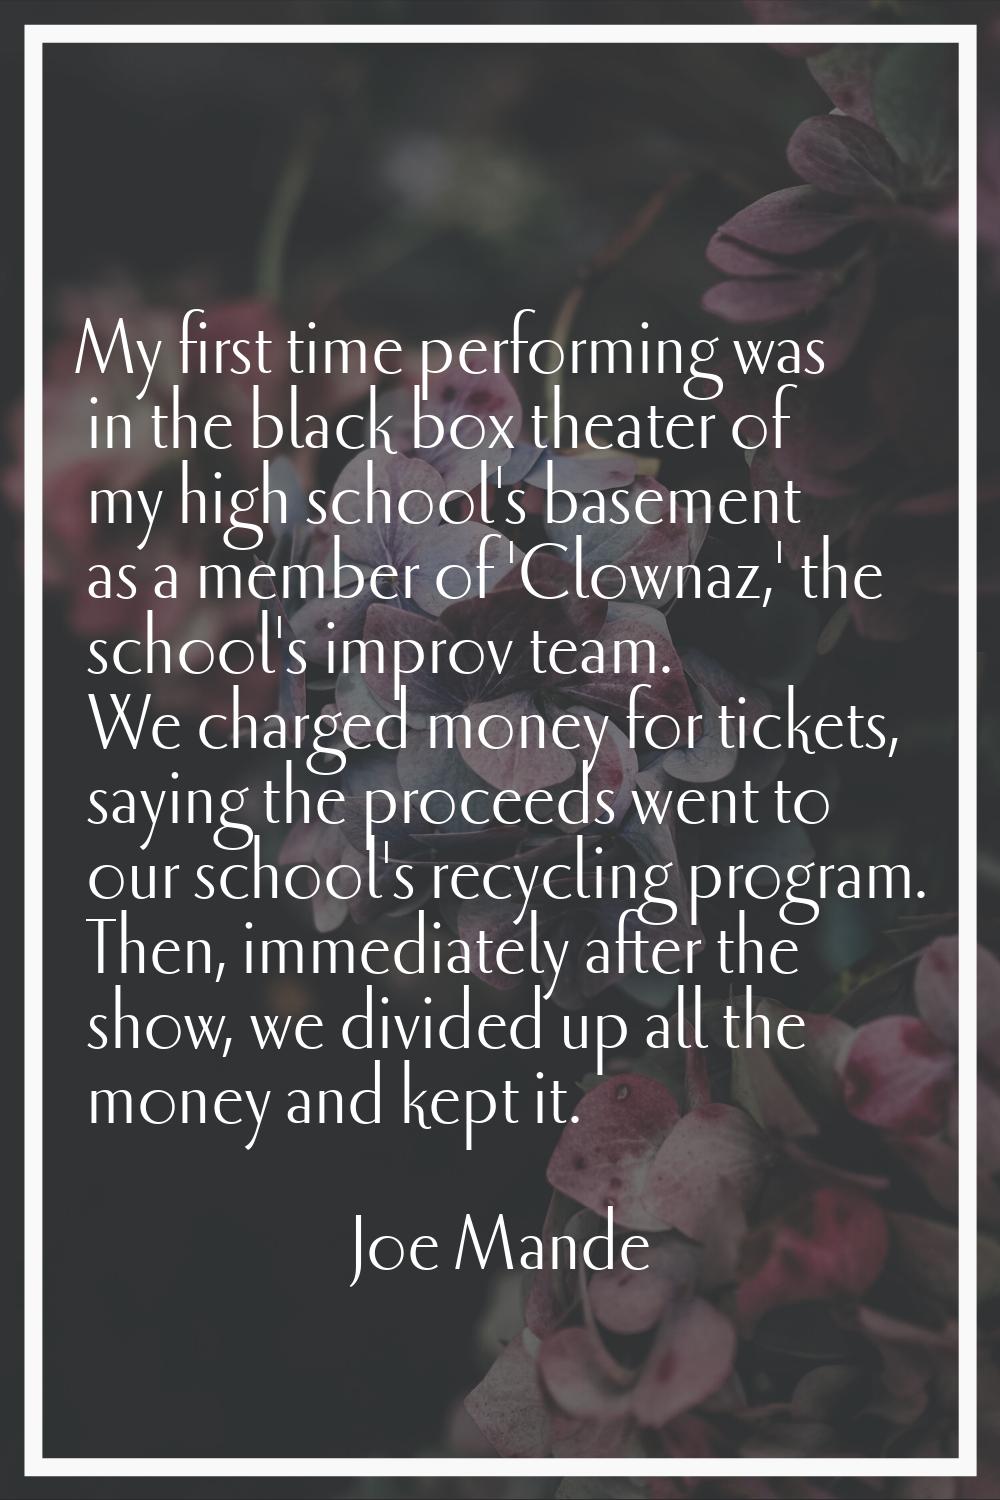 My first time performing was in the black box theater of my high school's basement as a member of '